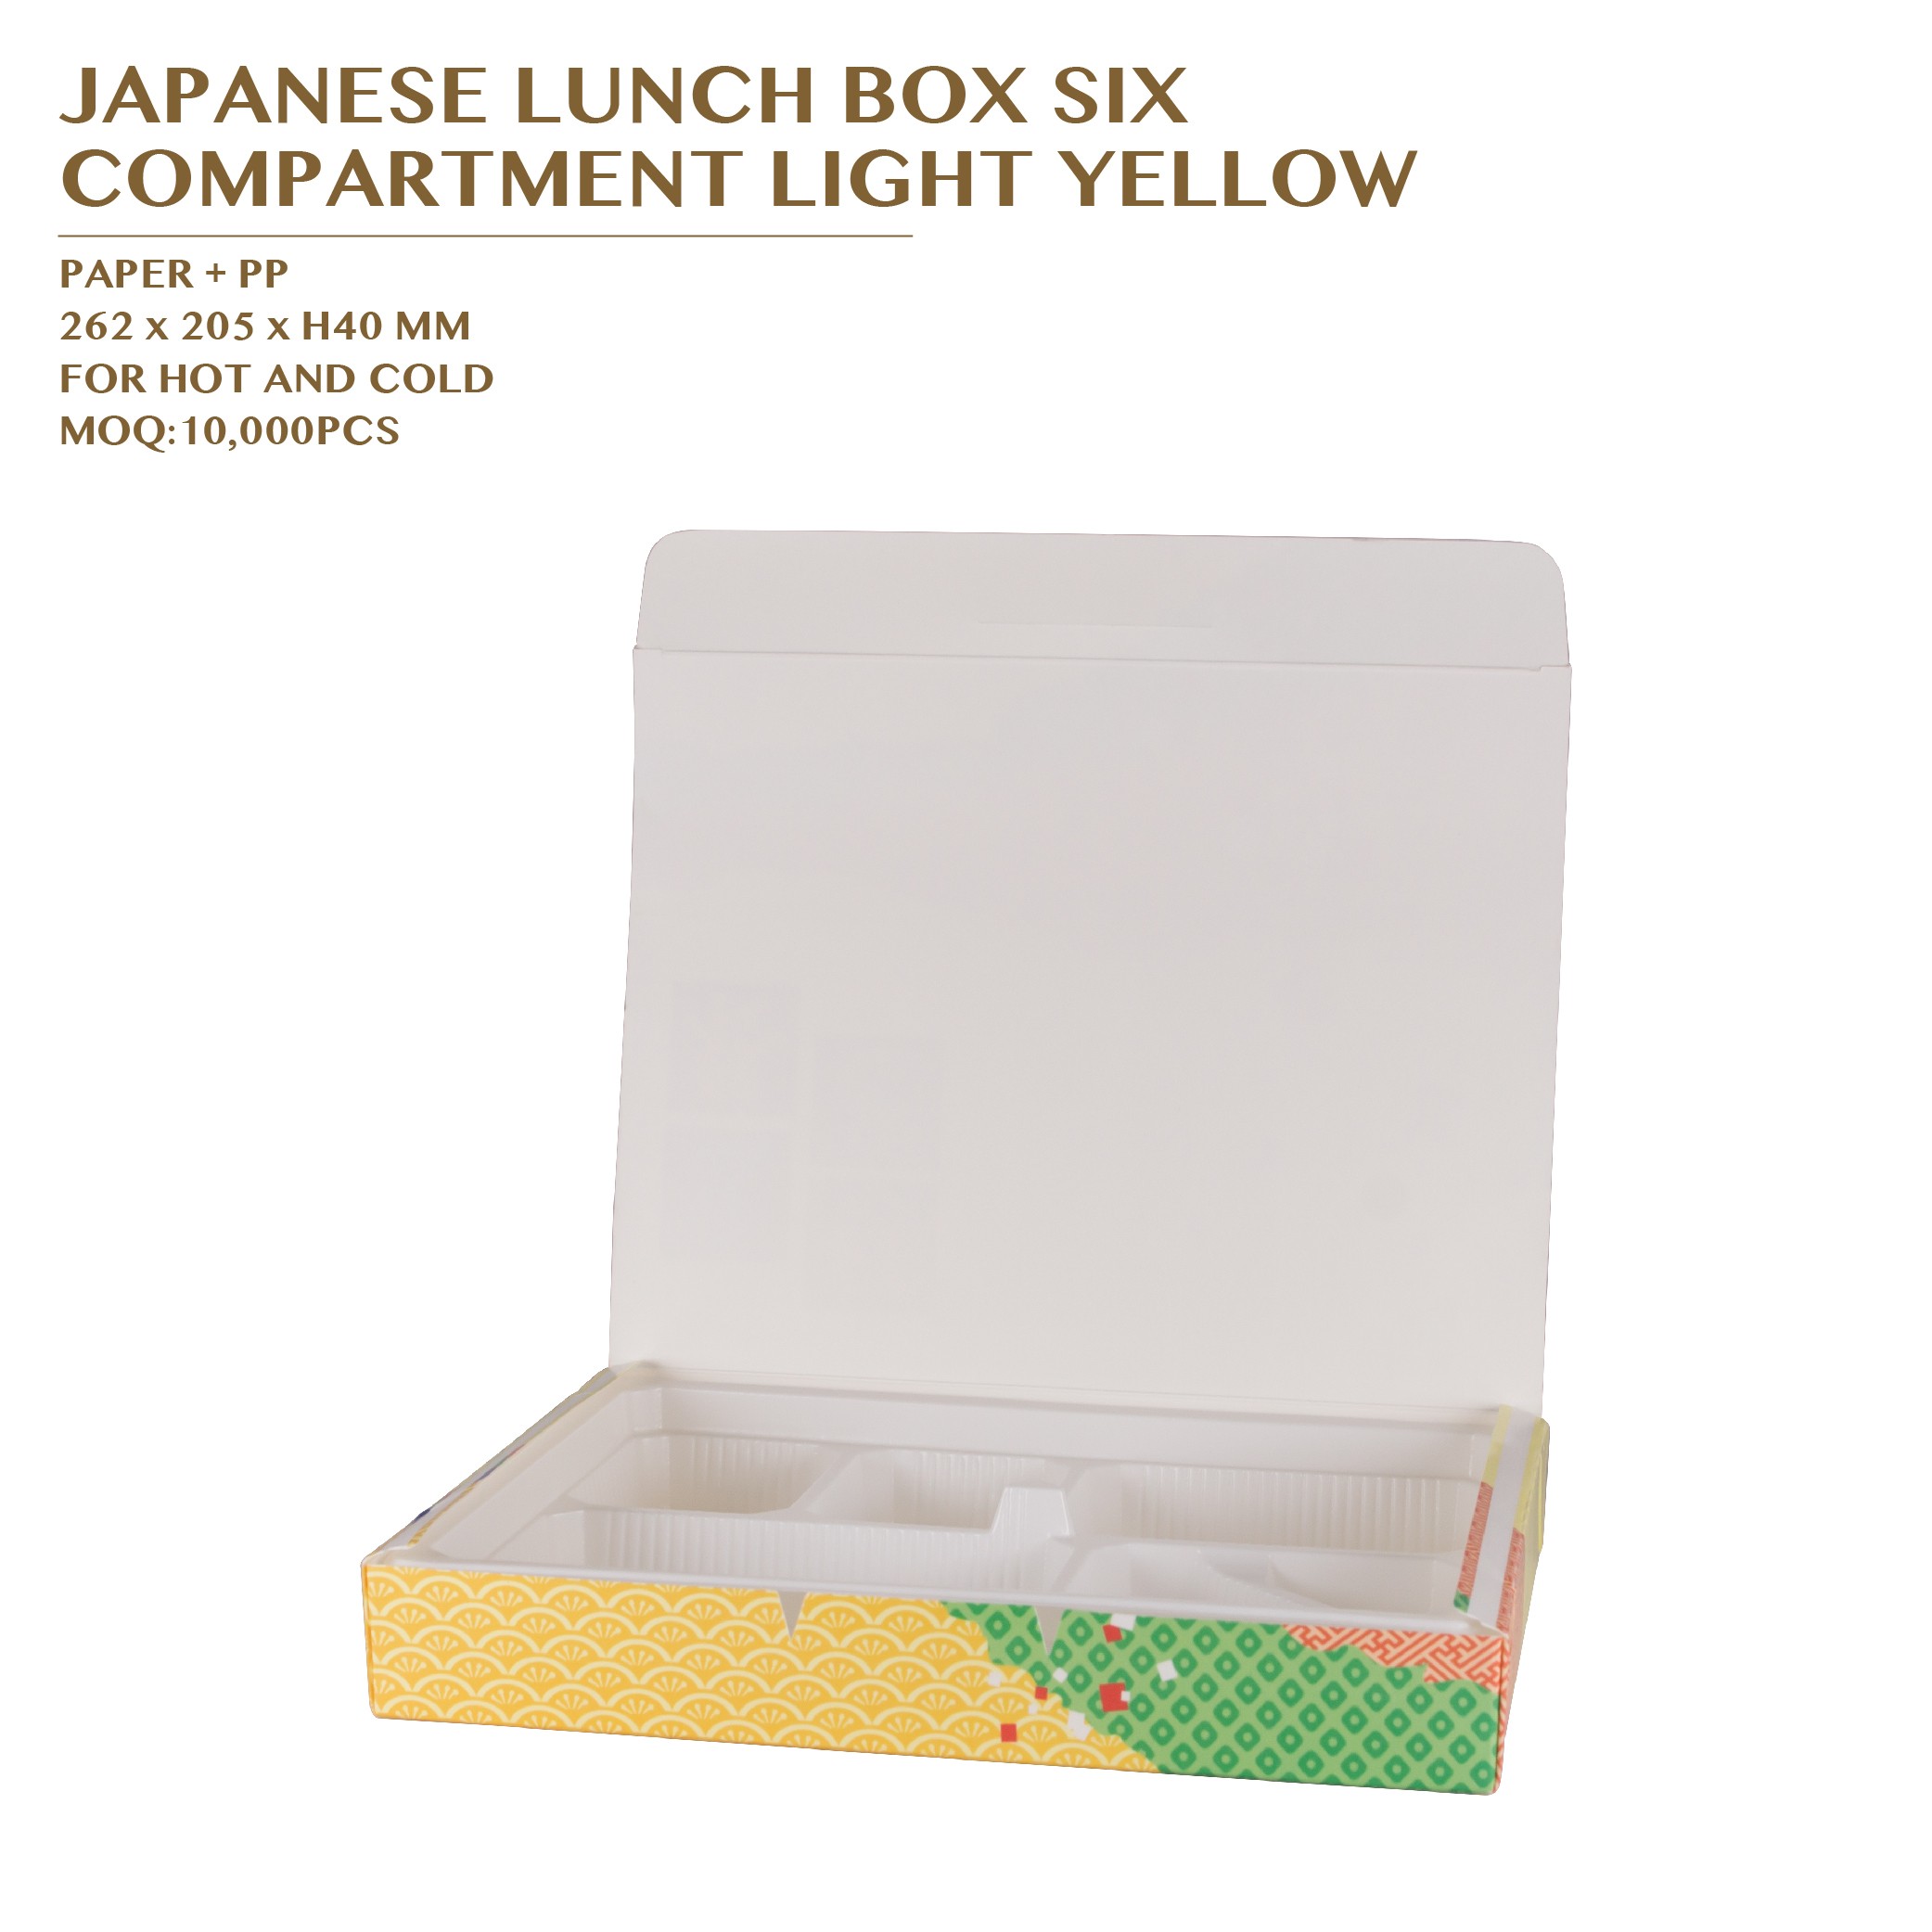 PRE-ORDER JAPANESE LUNCH BOX SIX  COMPARTMENT LIGHT YELLOW 250SET/CTN